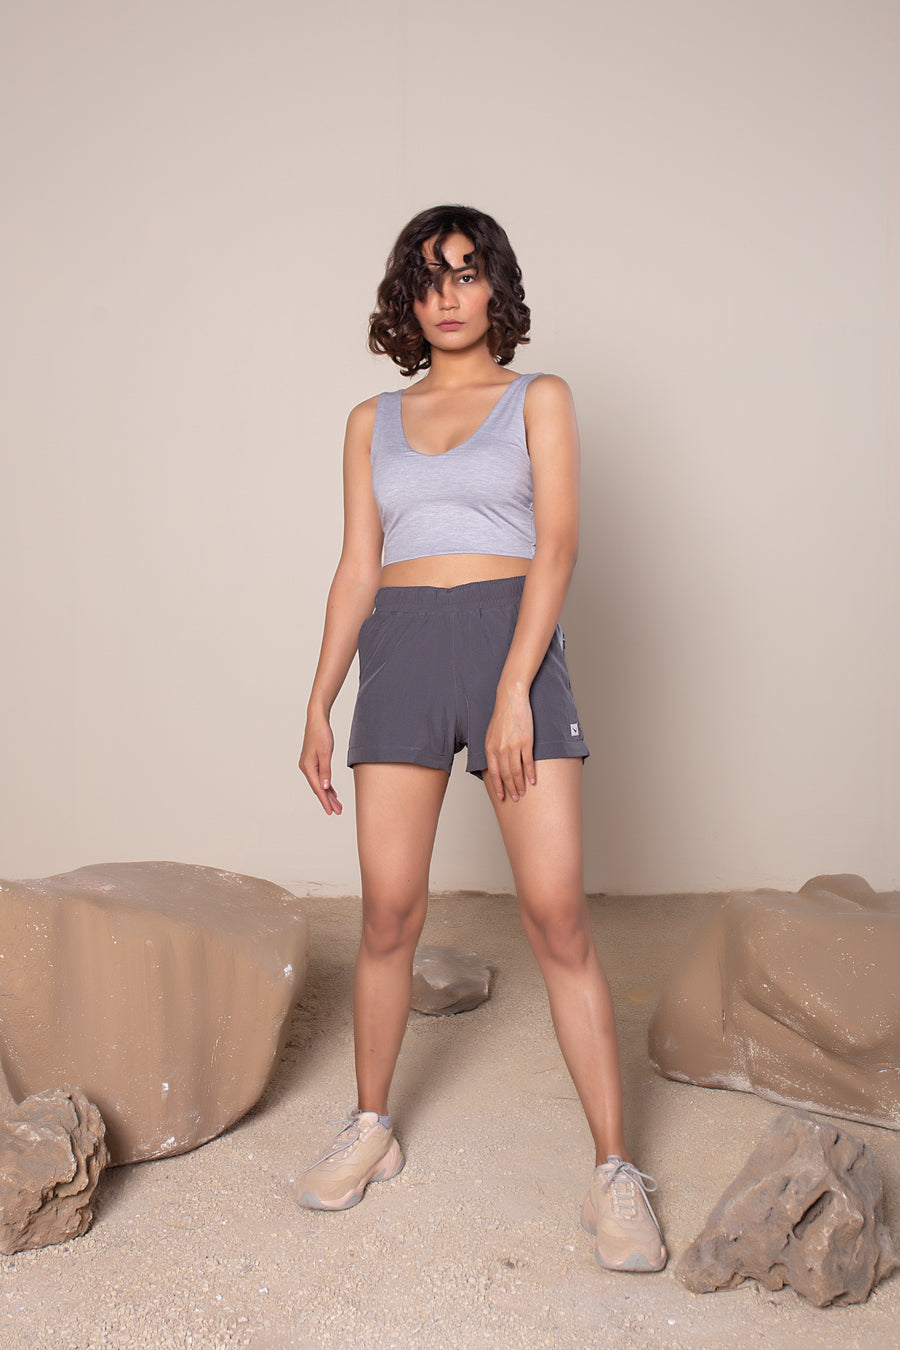 Women's Vera Crop in Marble Gray | VOLO Apparel | The perfect athletic crop top made with a four way stretch bamboo fiber blend. Double lined and naturally odor resistant and antimicrobial. The Vera bamboo crop is reinforced stitched, the bamboo fiber comes with its own climate control properties, making the tops more breathable in the heat and more insulating in the cold.